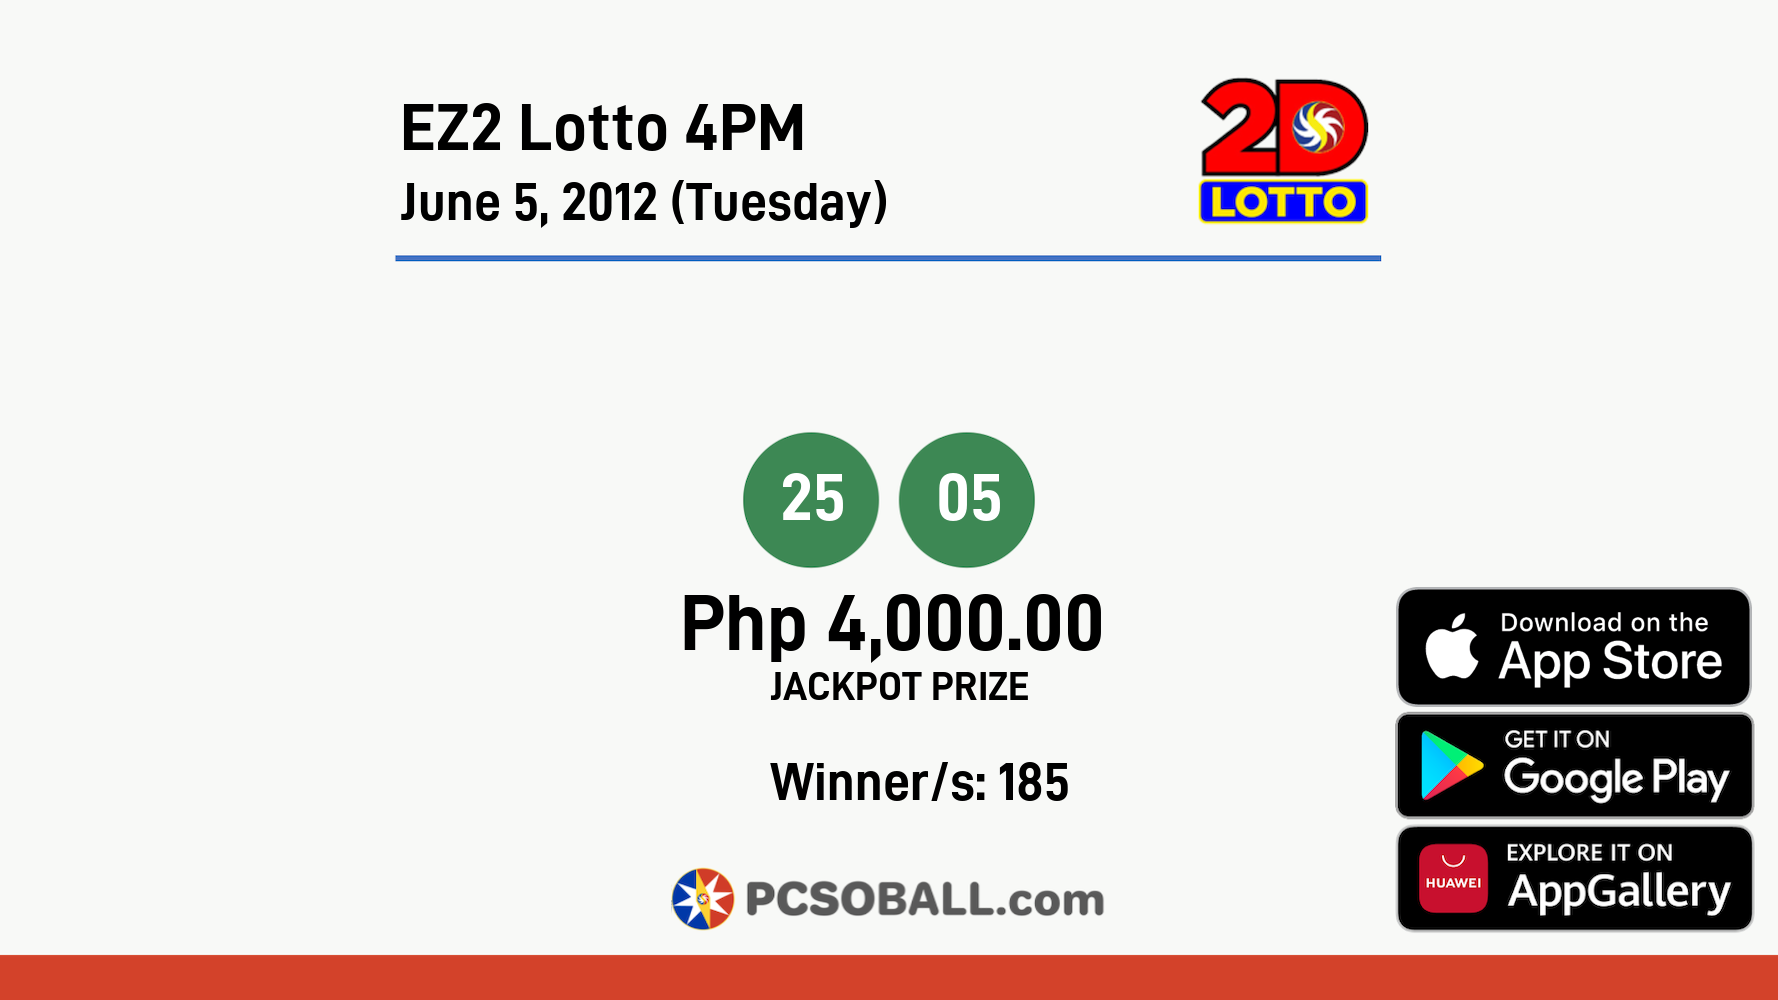 EZ2 Lotto 4PM June 5, 2012 (Tuesday) Result